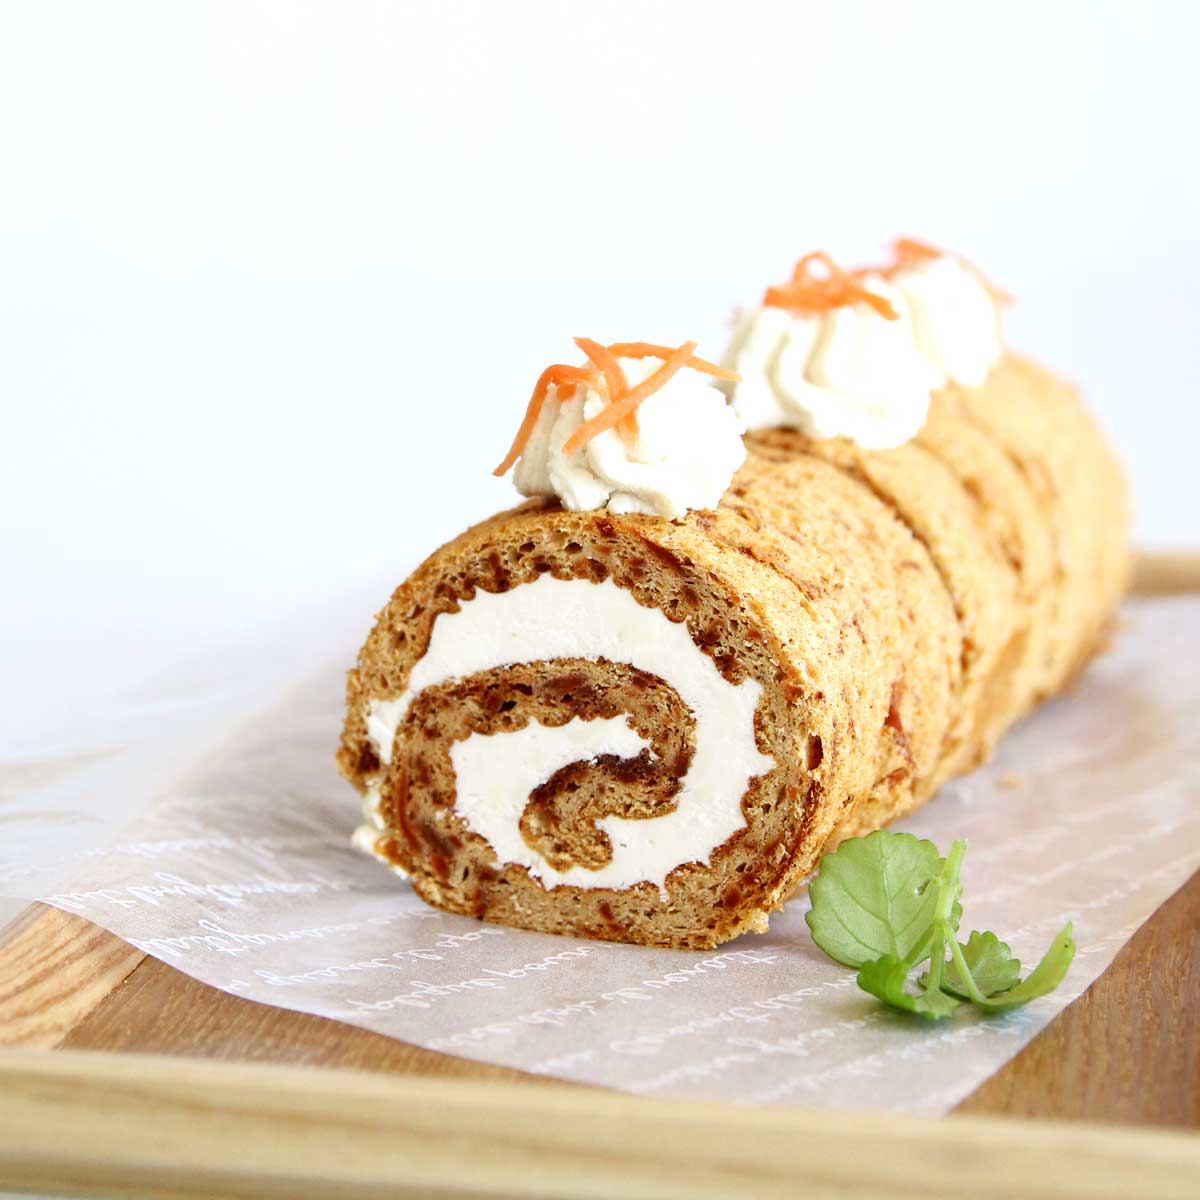 Gluten Free Carrot Swiss Roll Cake Recipe to Make for Easter - Peppermint Whipped Cream